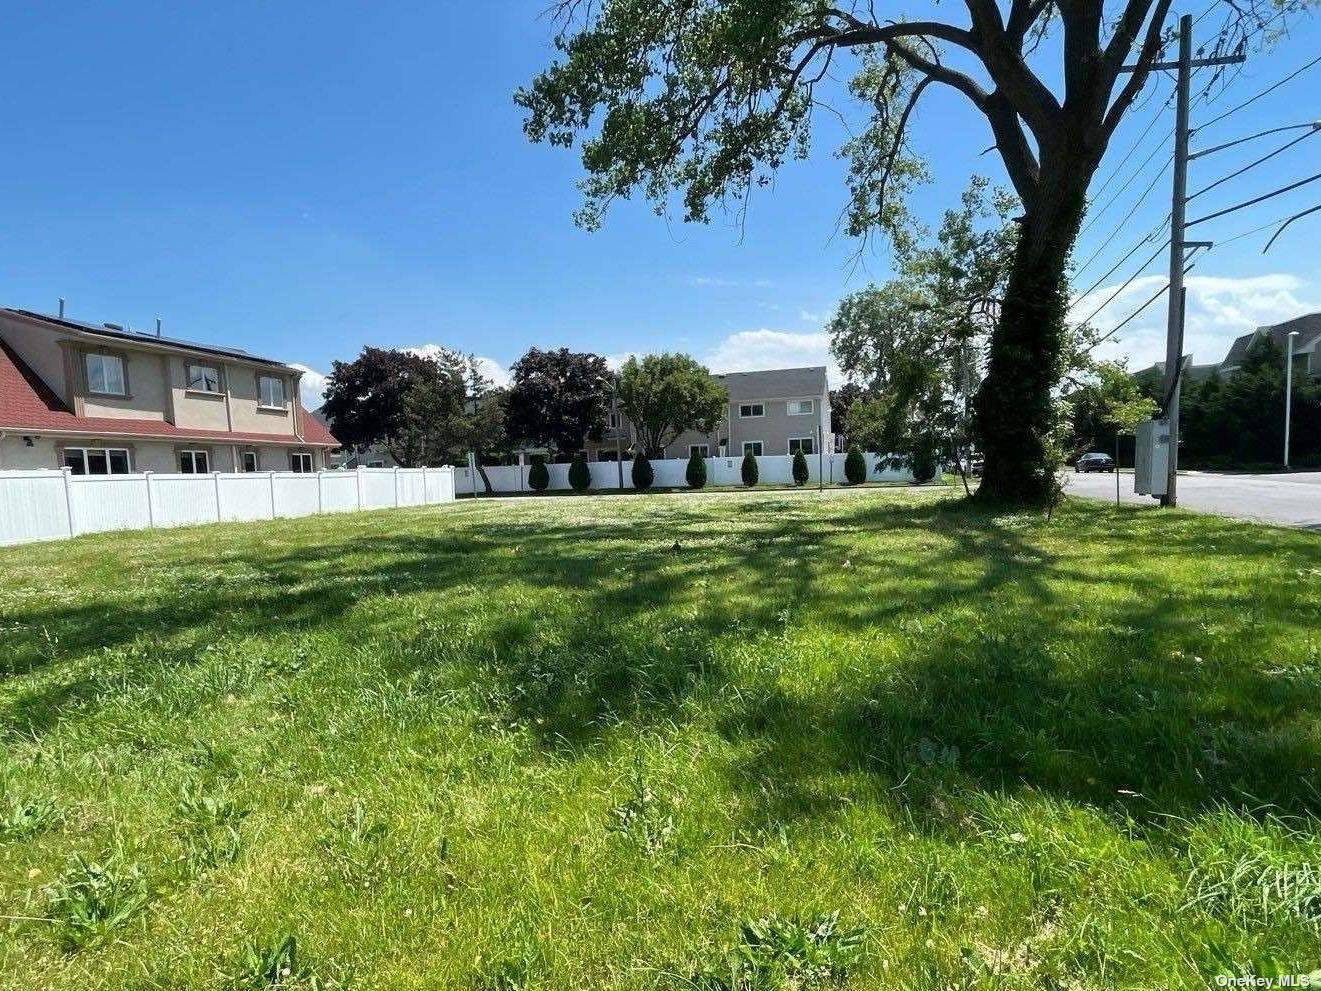 Exceptional opportunity to secure a flat, cleared and oversized building lot for end user or builder alike.